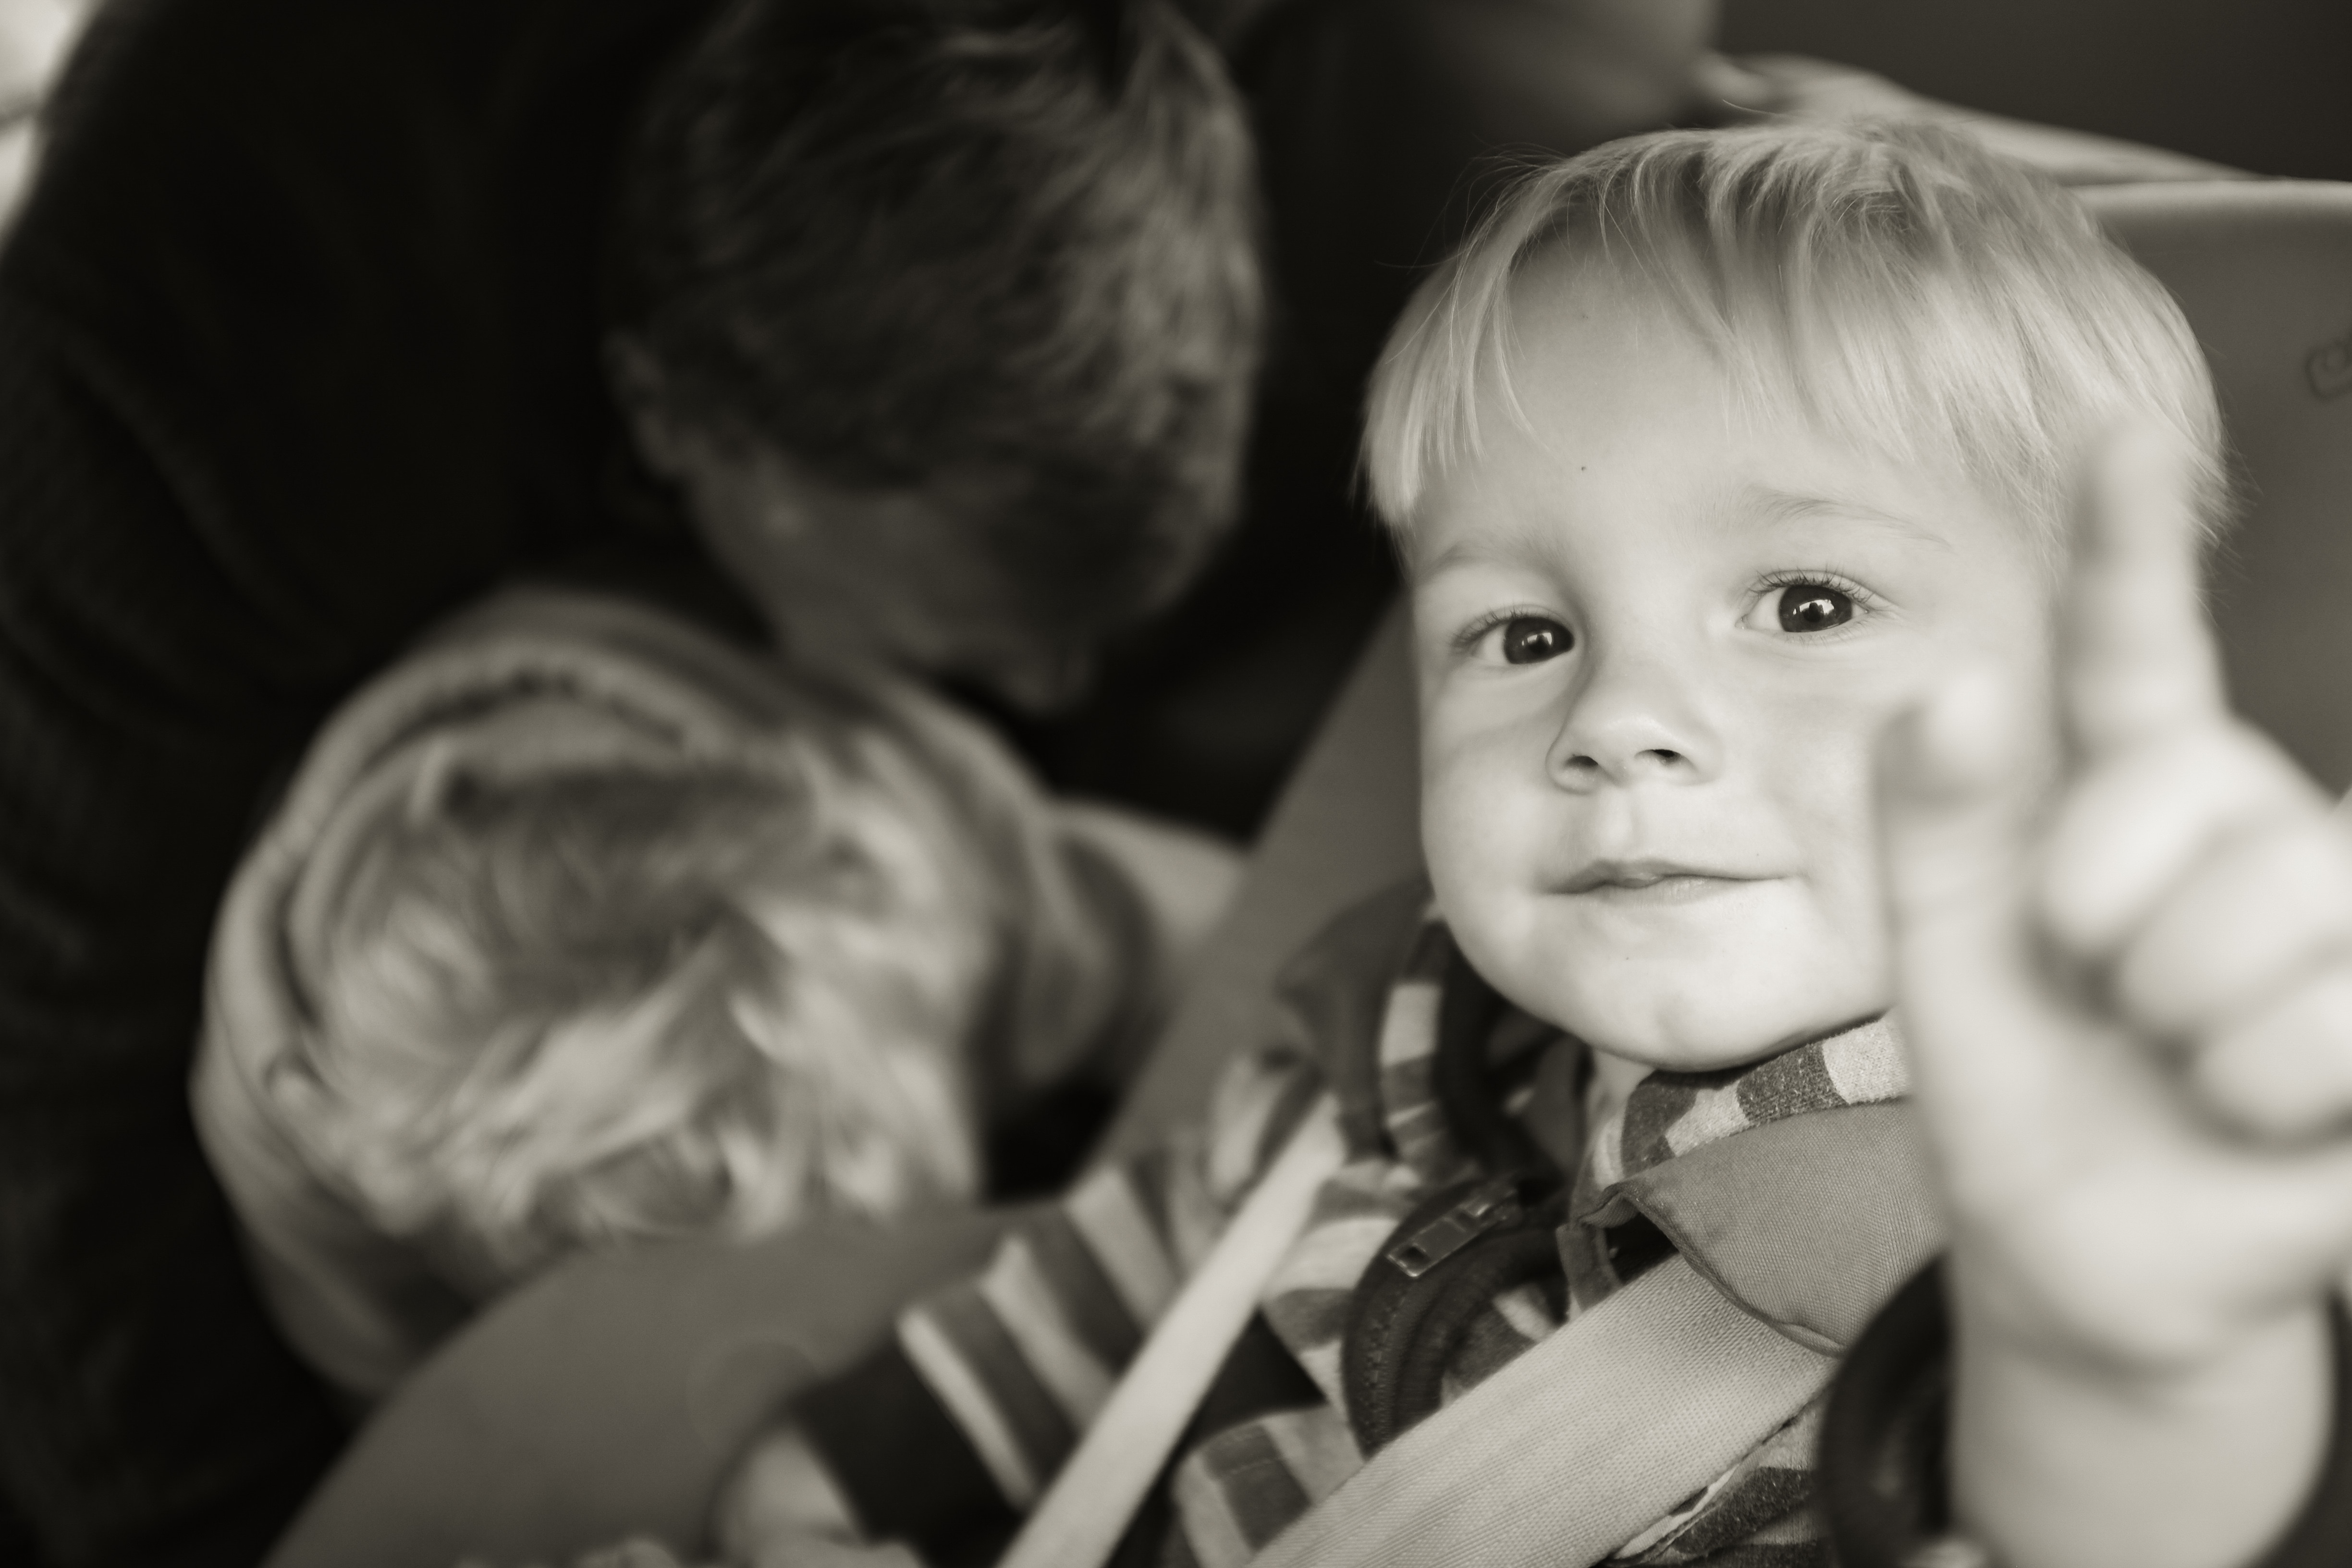 grayscale photo of baby and another boy behind